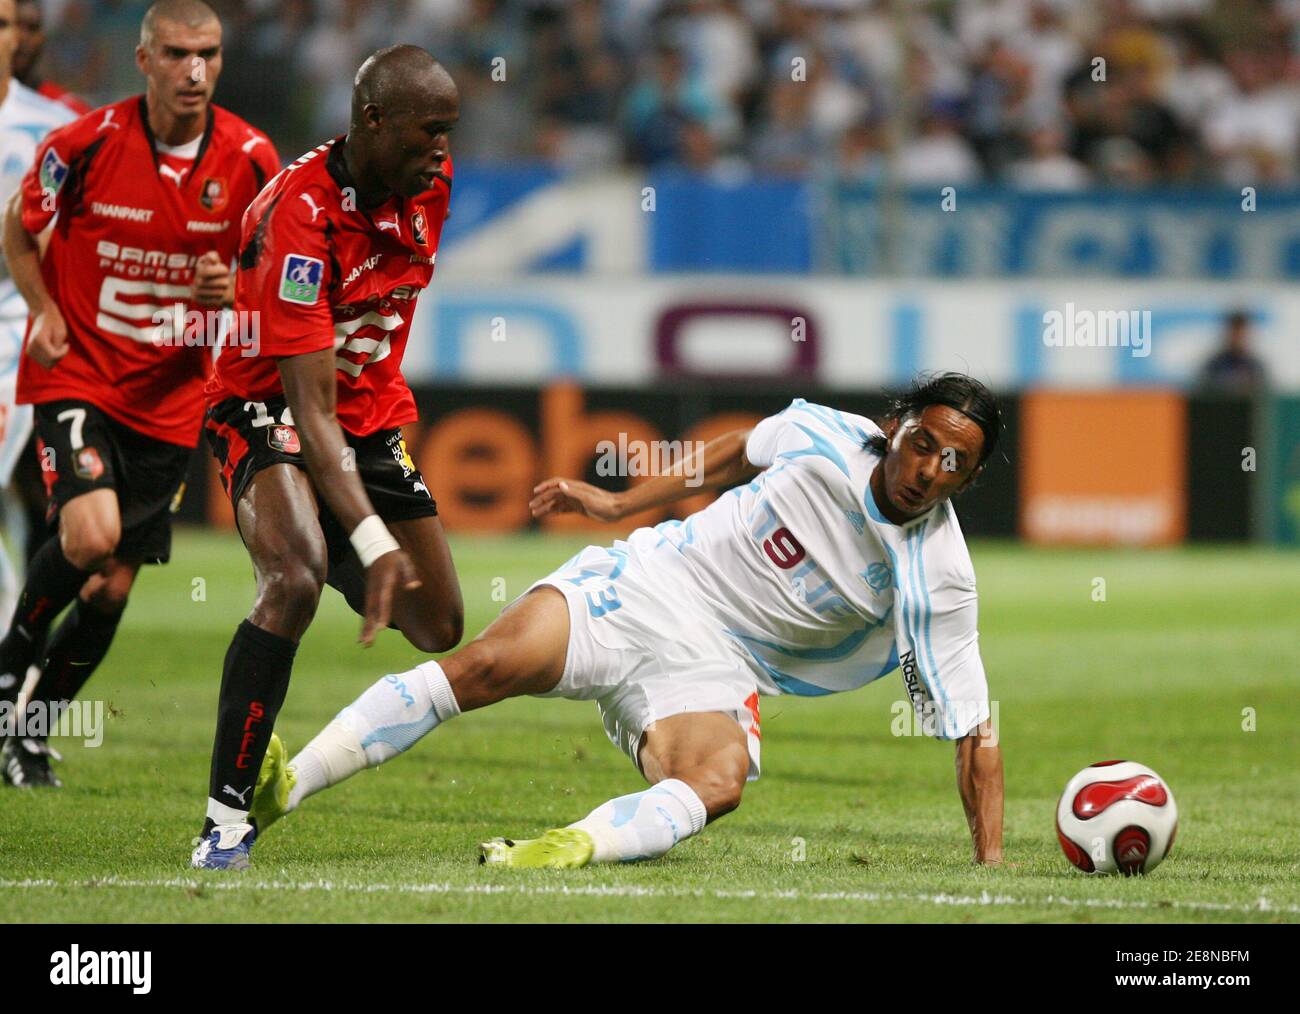 OM's Salim Arrache during the French Premier League football match, OM vs  Rennes at 'Le Velodrome' stadium in Marseille, France on August 11, 2007.  The match ended in a 0-0 draw. Photo